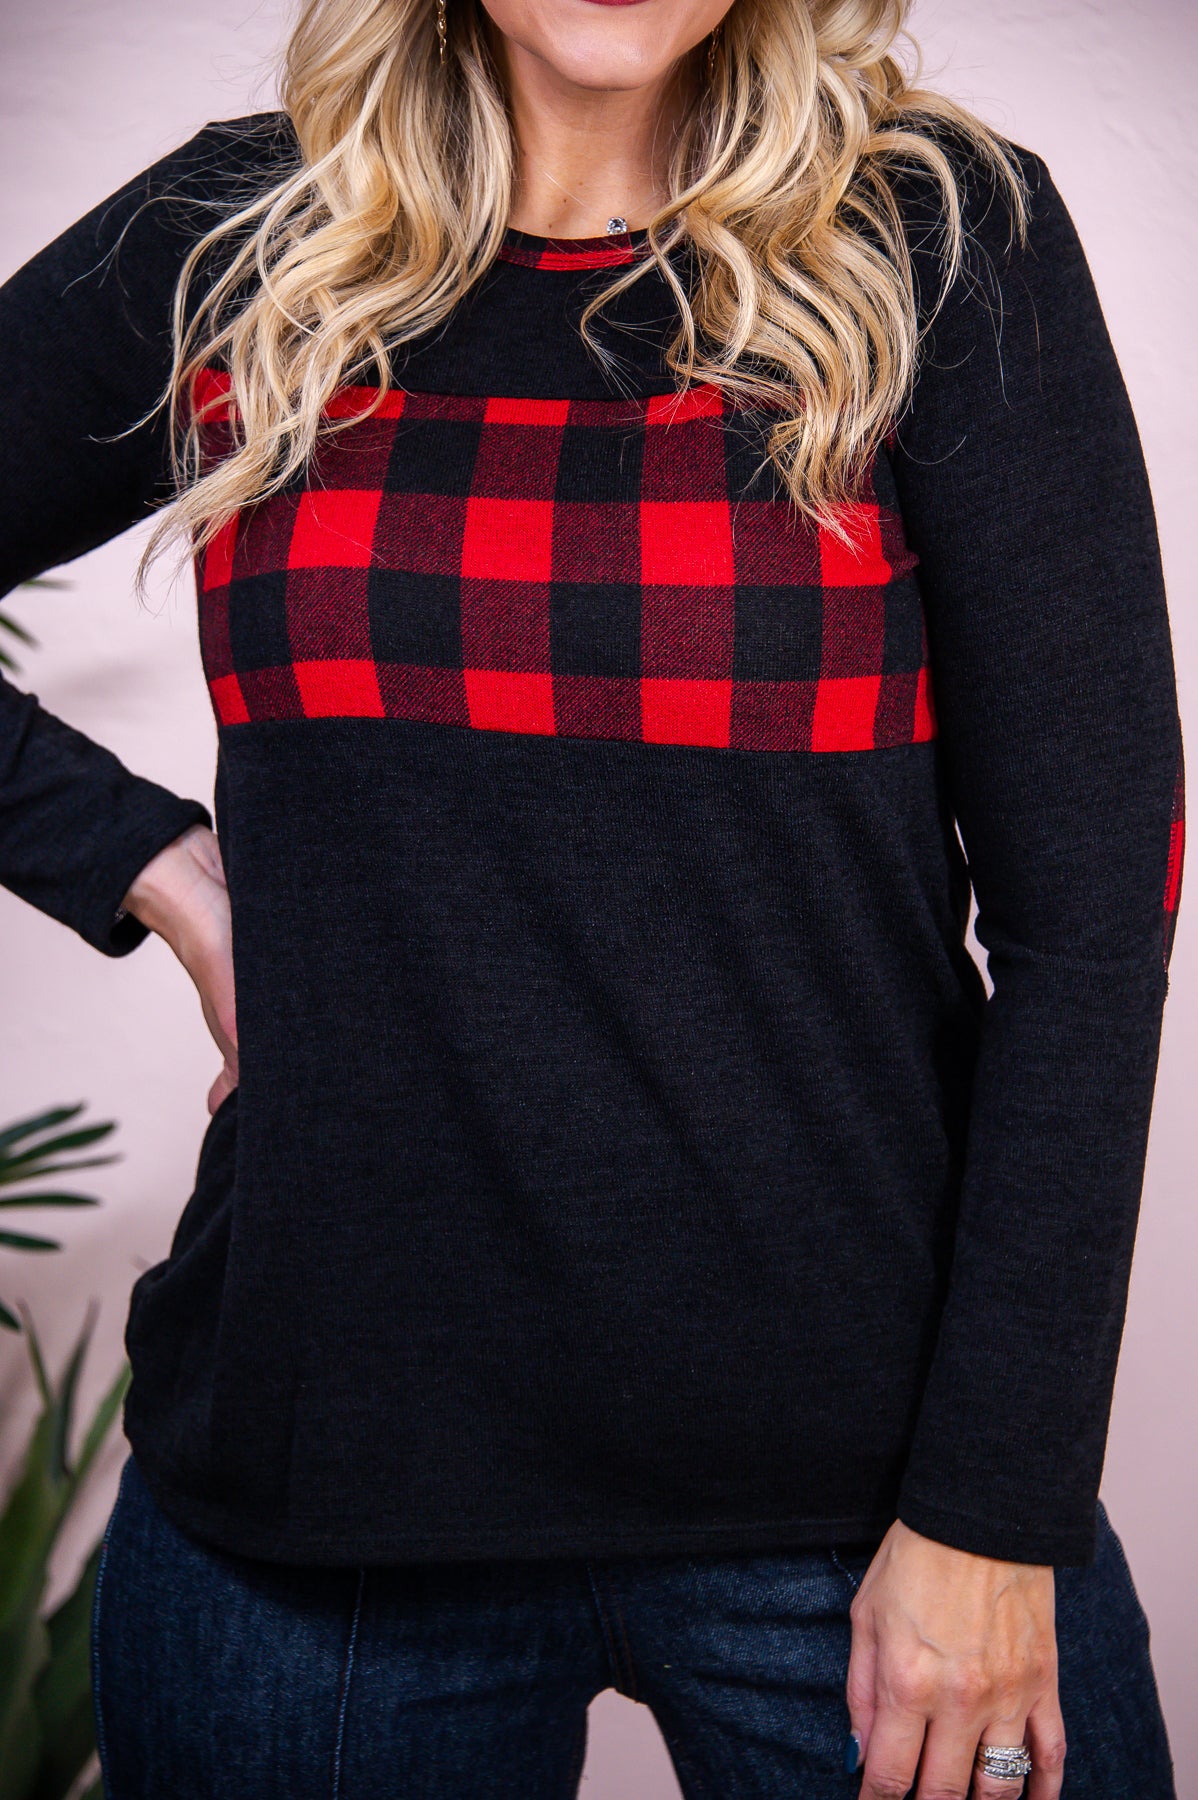 The Story Of Christmas Black/Red Checkered Top - T8354BK